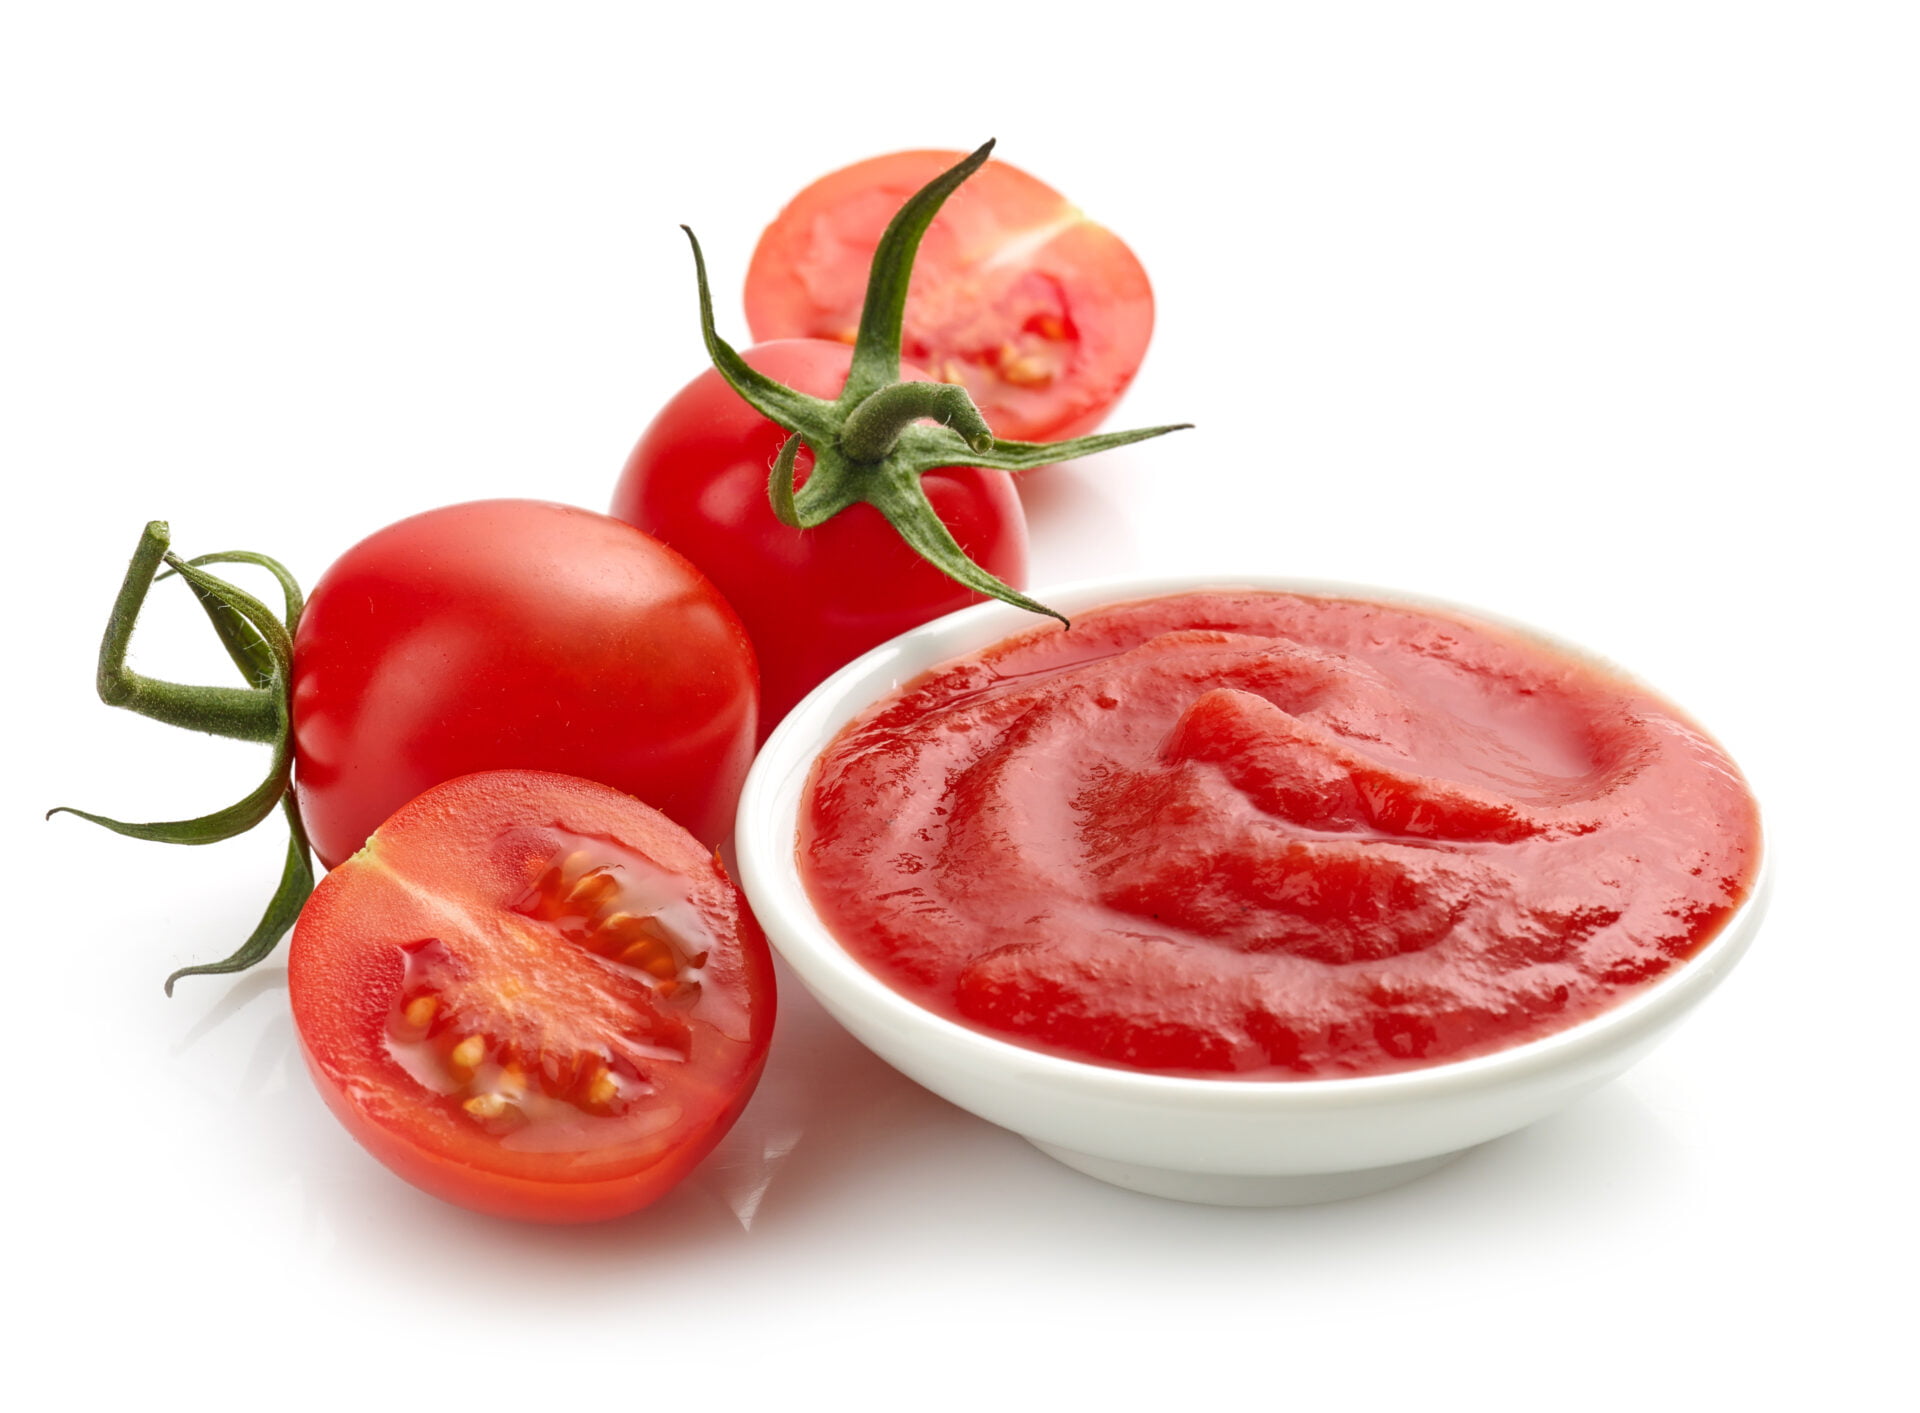 bowl of tomato sauce or ketchup on a white background